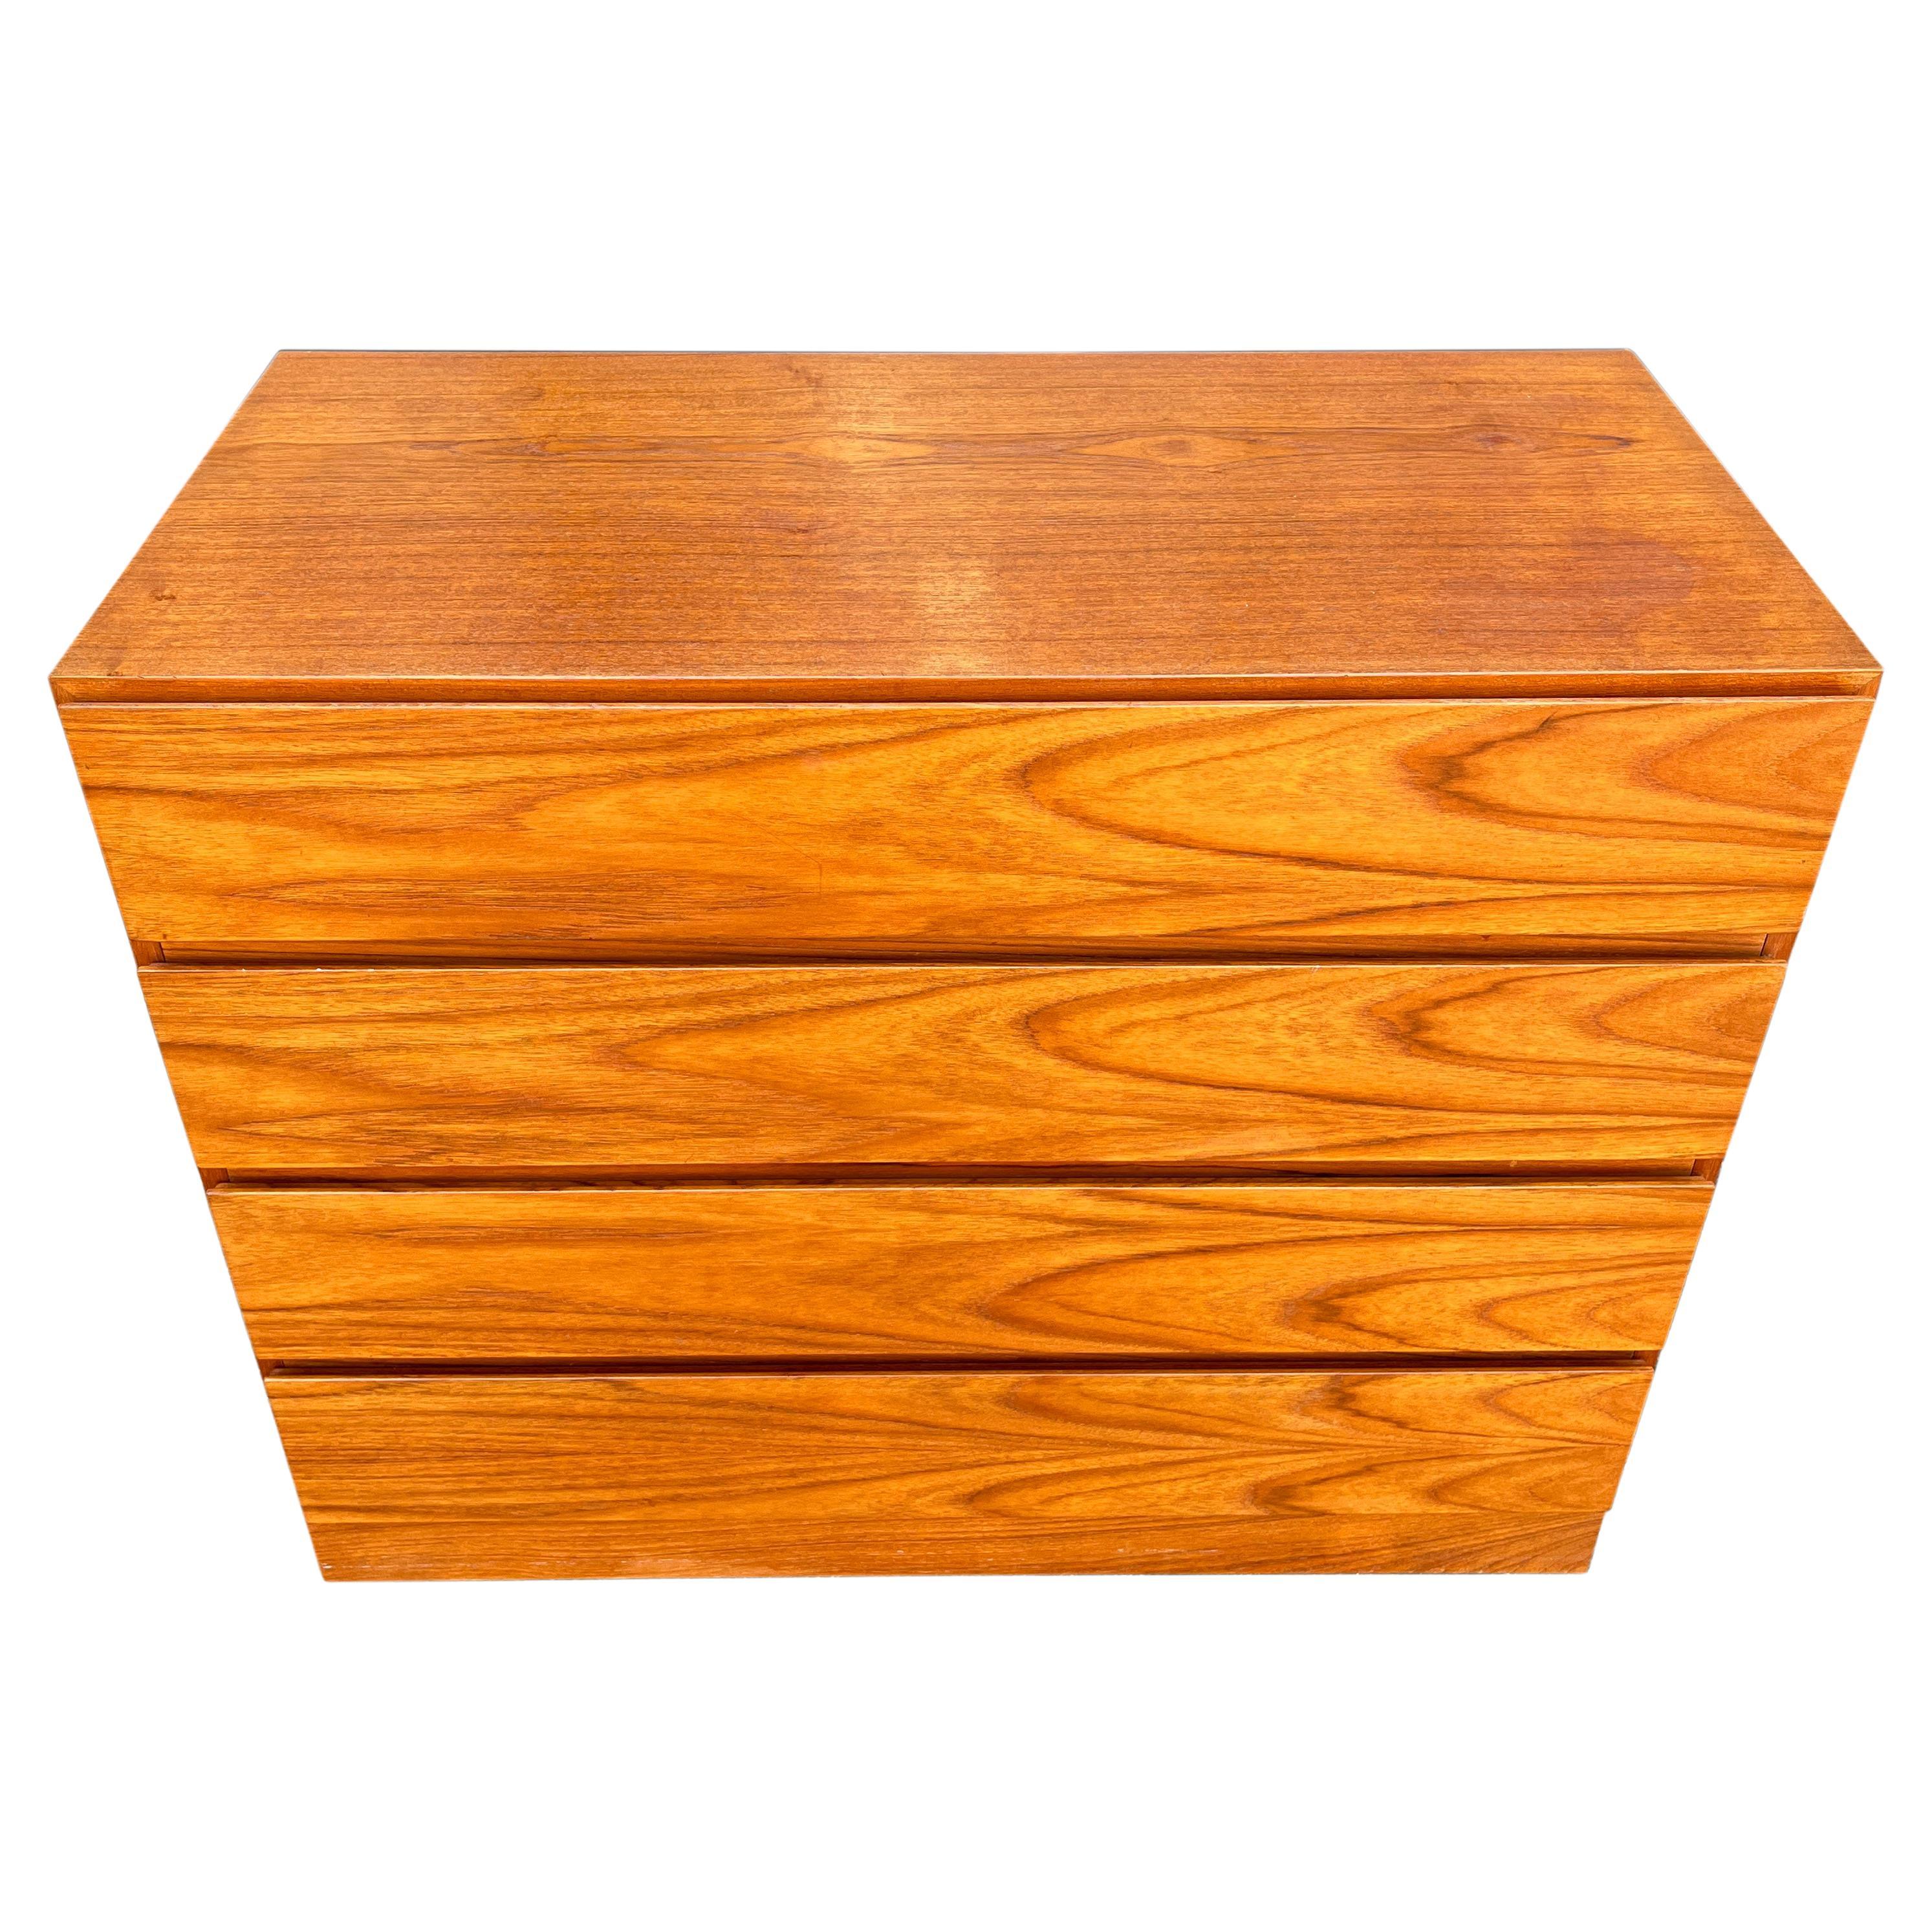 Teak chest of drawers made in Denmark on a plinth base. Utilitarian and minimalist in design. All 4 drawers glide smoothly and are very clean. 

Designed by Arne Wahl Iversen.

     